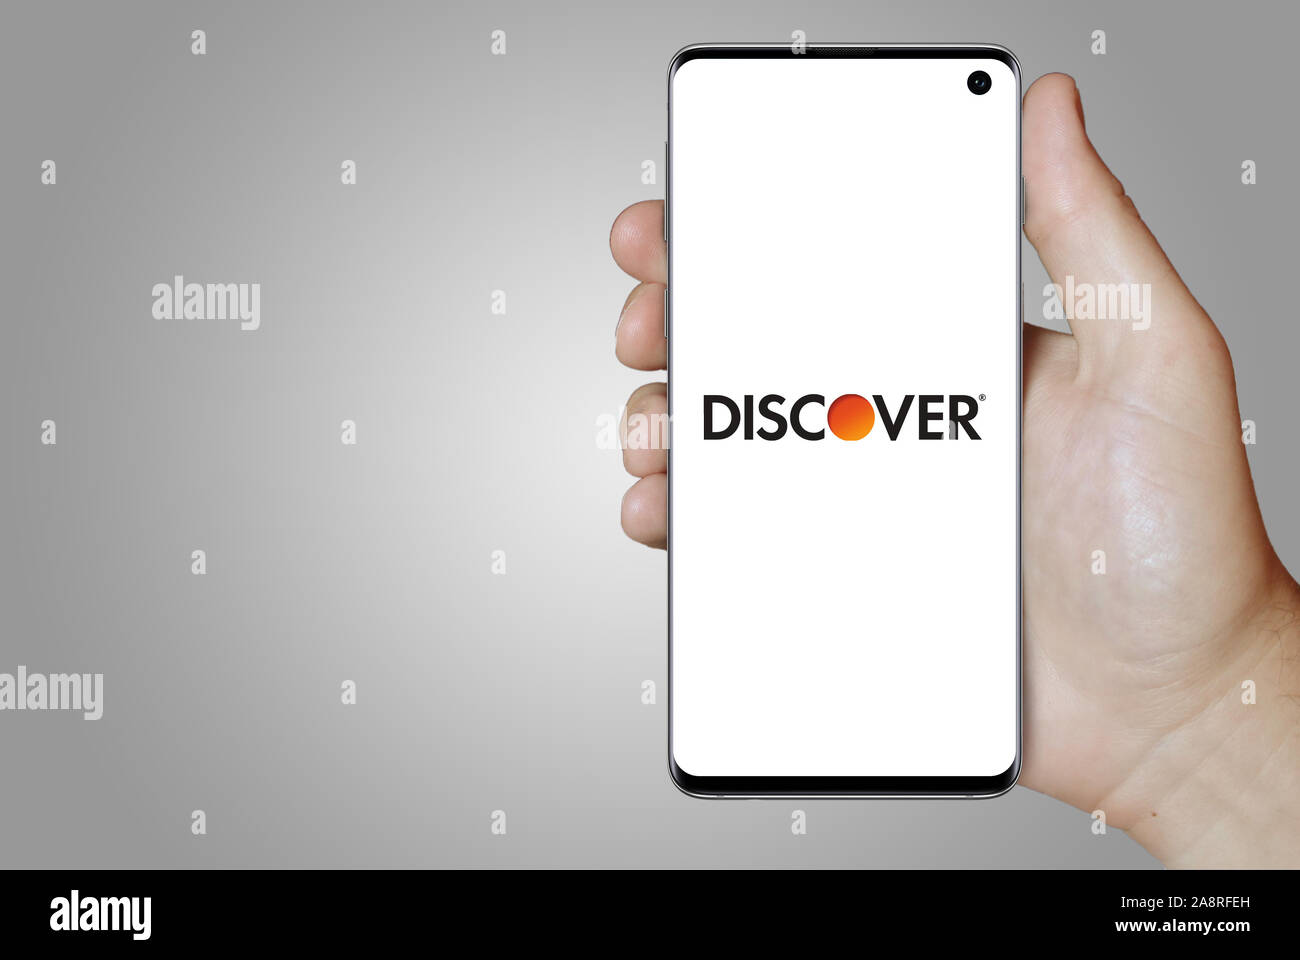 Logo of public company Discover Financial Services displayed on a smartphone. Grey background. Credit: PIXDUCE Stock Photo